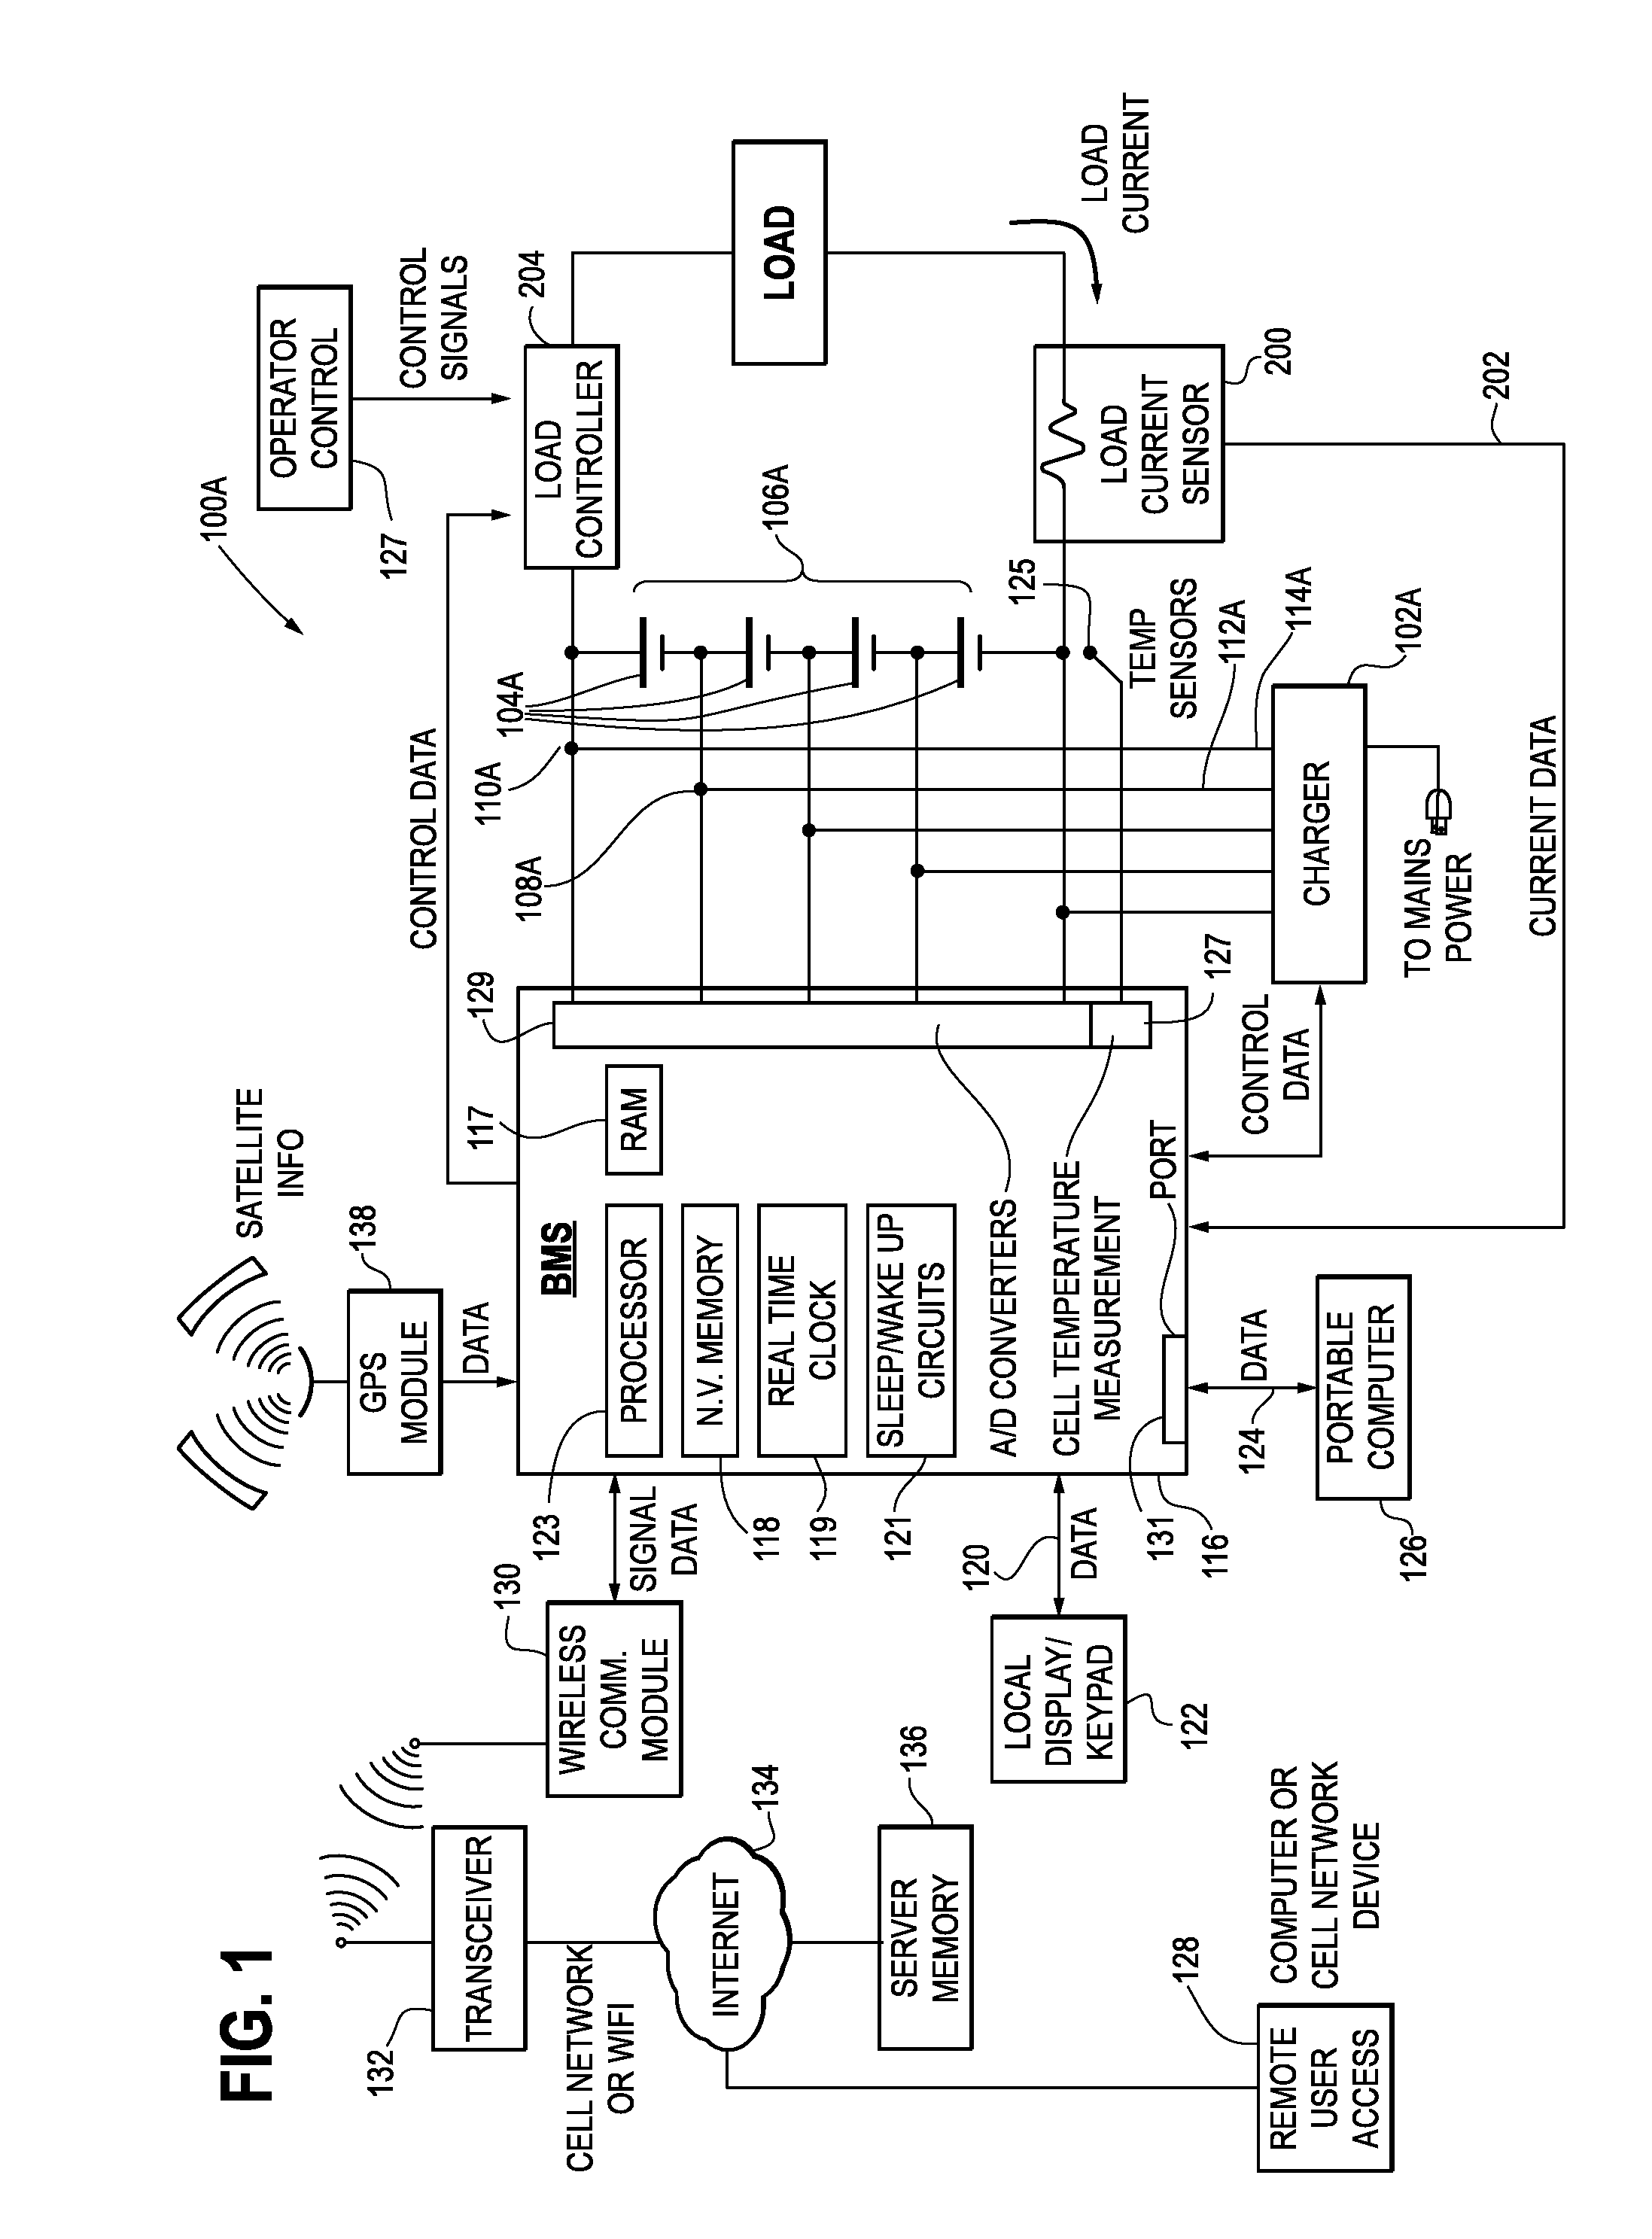 Intelligent battery management system and method